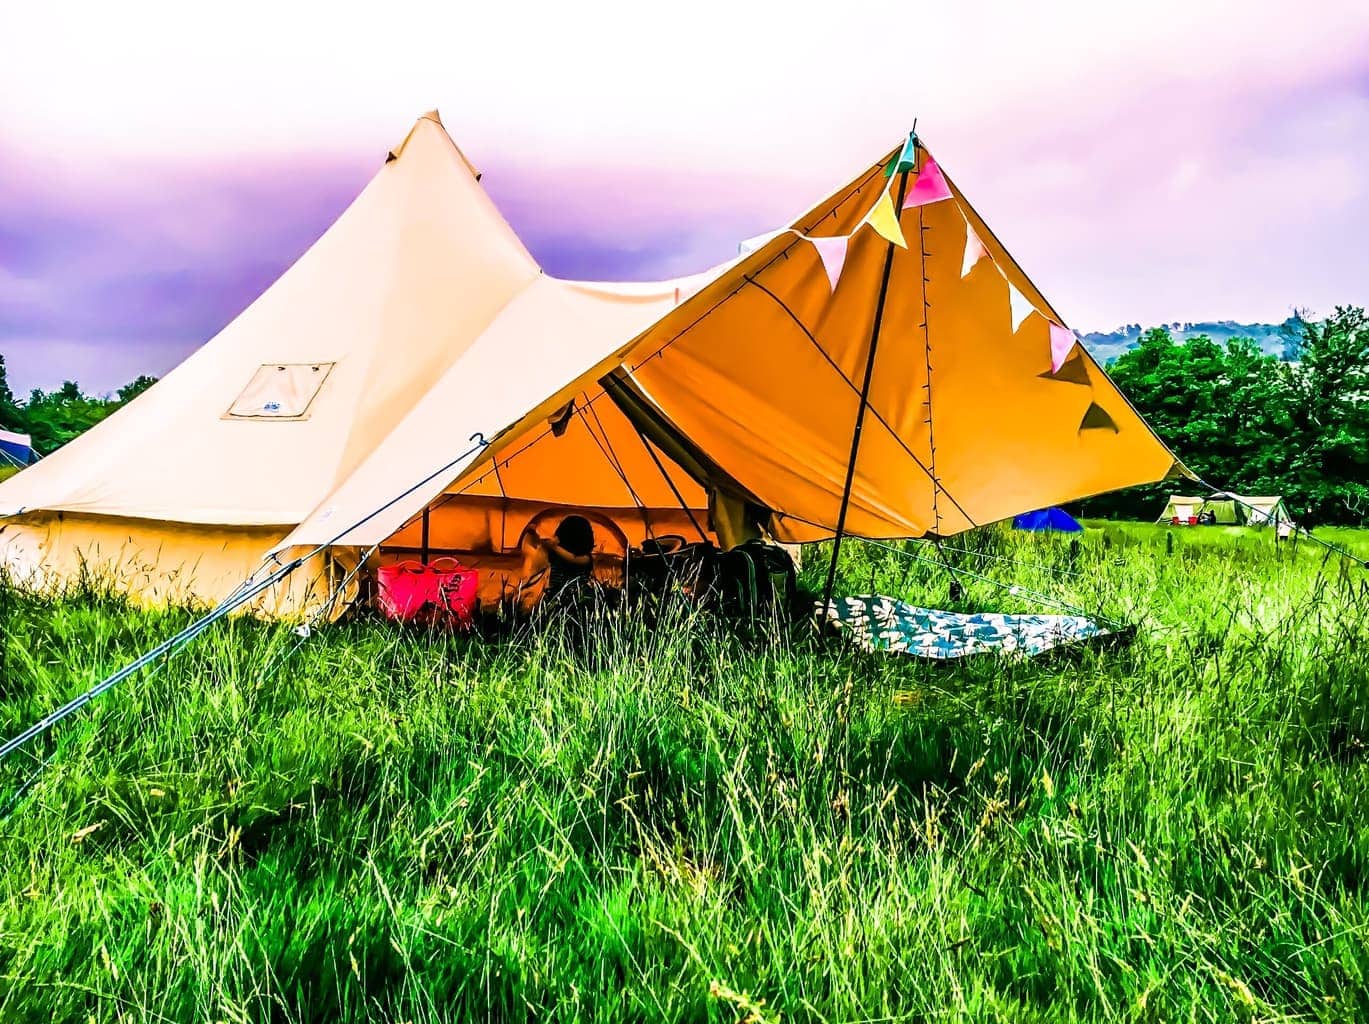 Top Tips for Festival Glamping with Children including a Festival Checklist